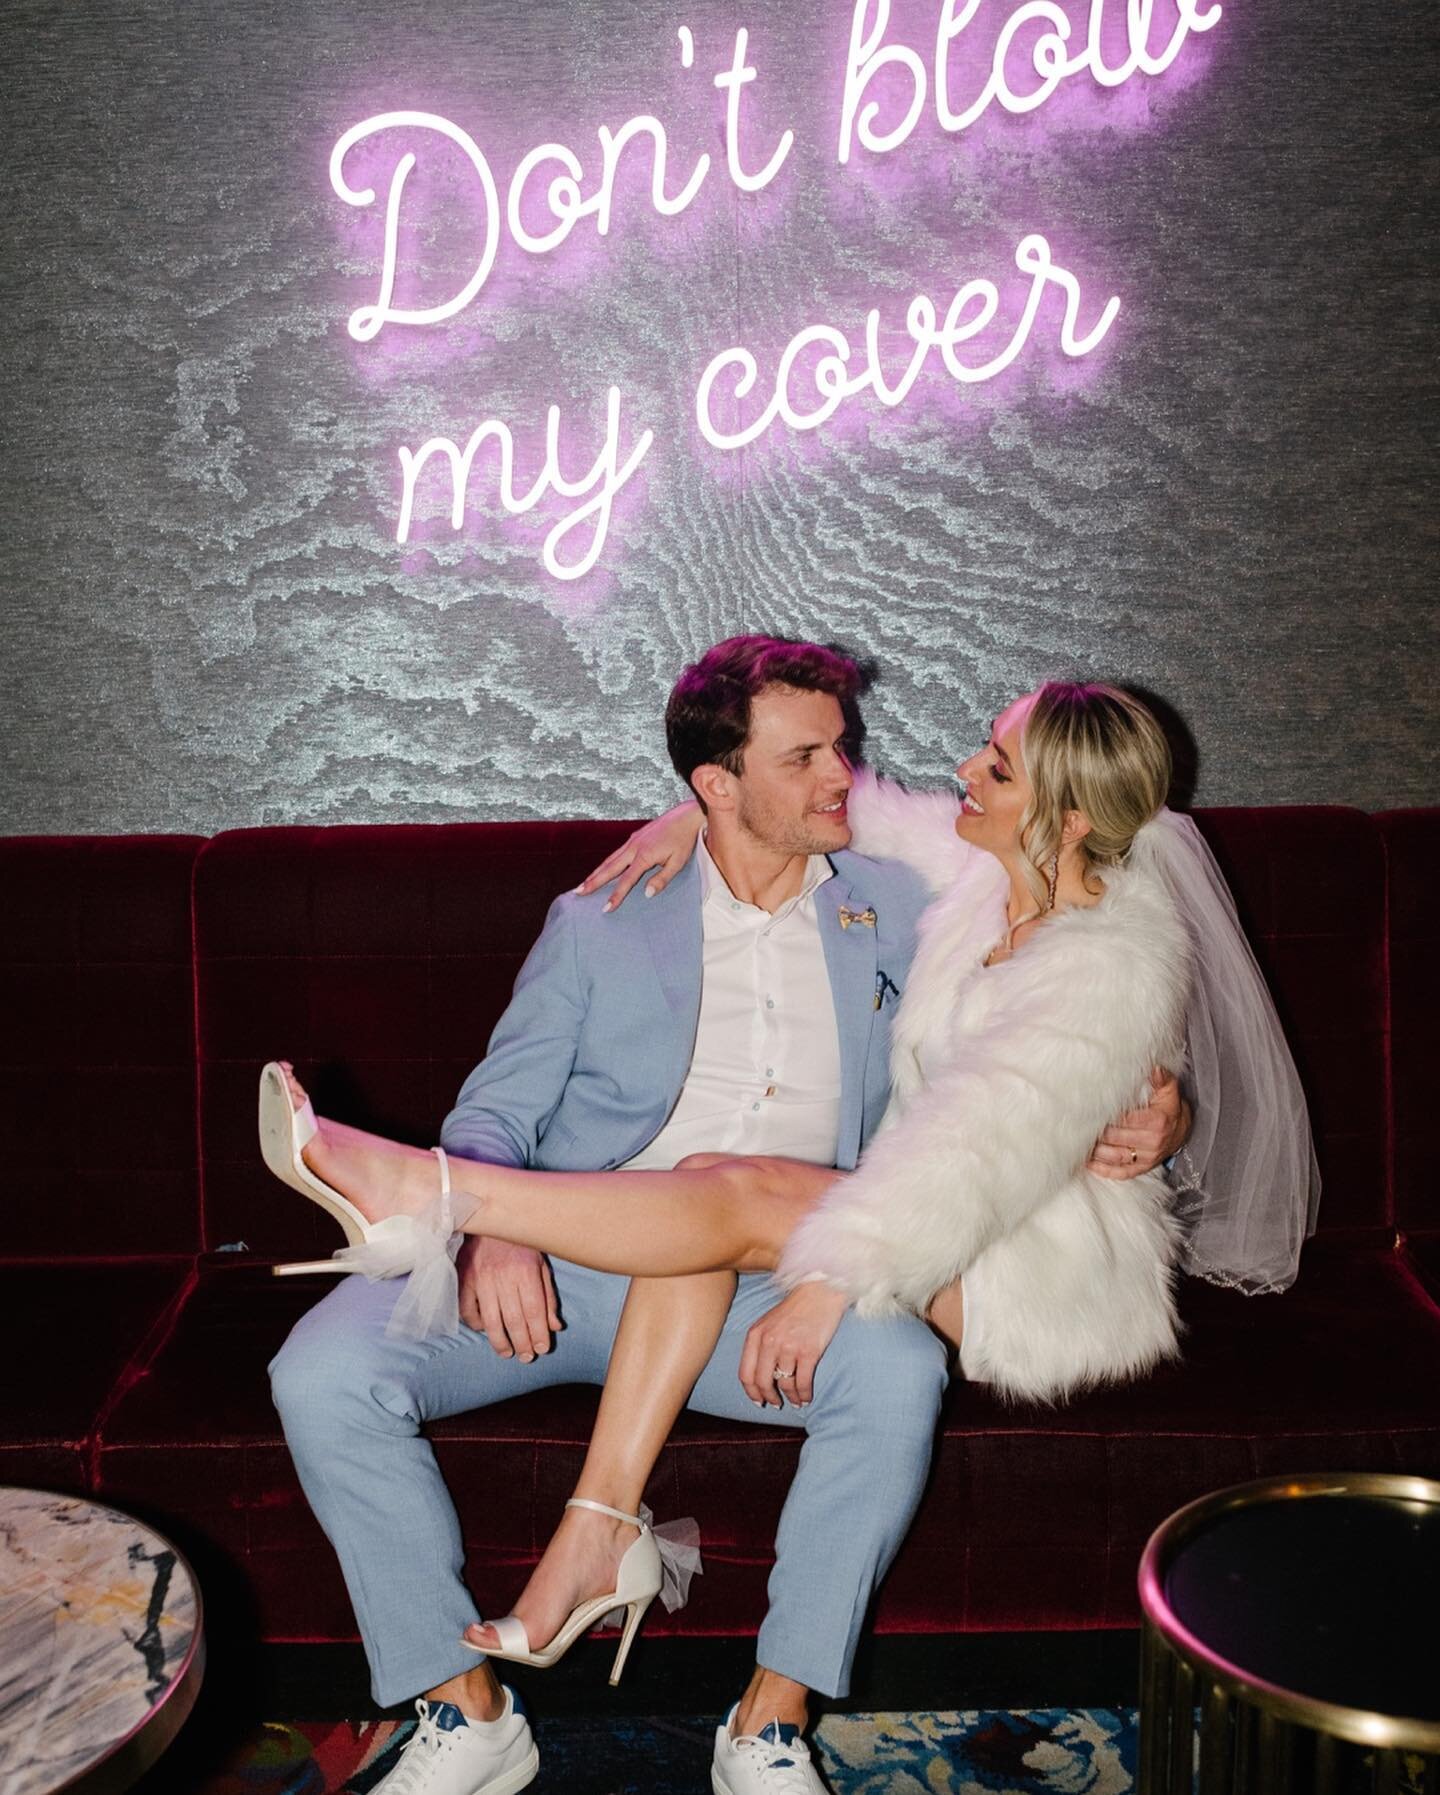 Alex &amp; Romain had the quintessential fun Vegas wedding (complete with an Elvis ceremony, drinks at the Cosmopolitan, and portraits downtown)✨ we loved getting to show them some of our fave spots! They&rsquo;re just as sweet as they are gorgeous, 